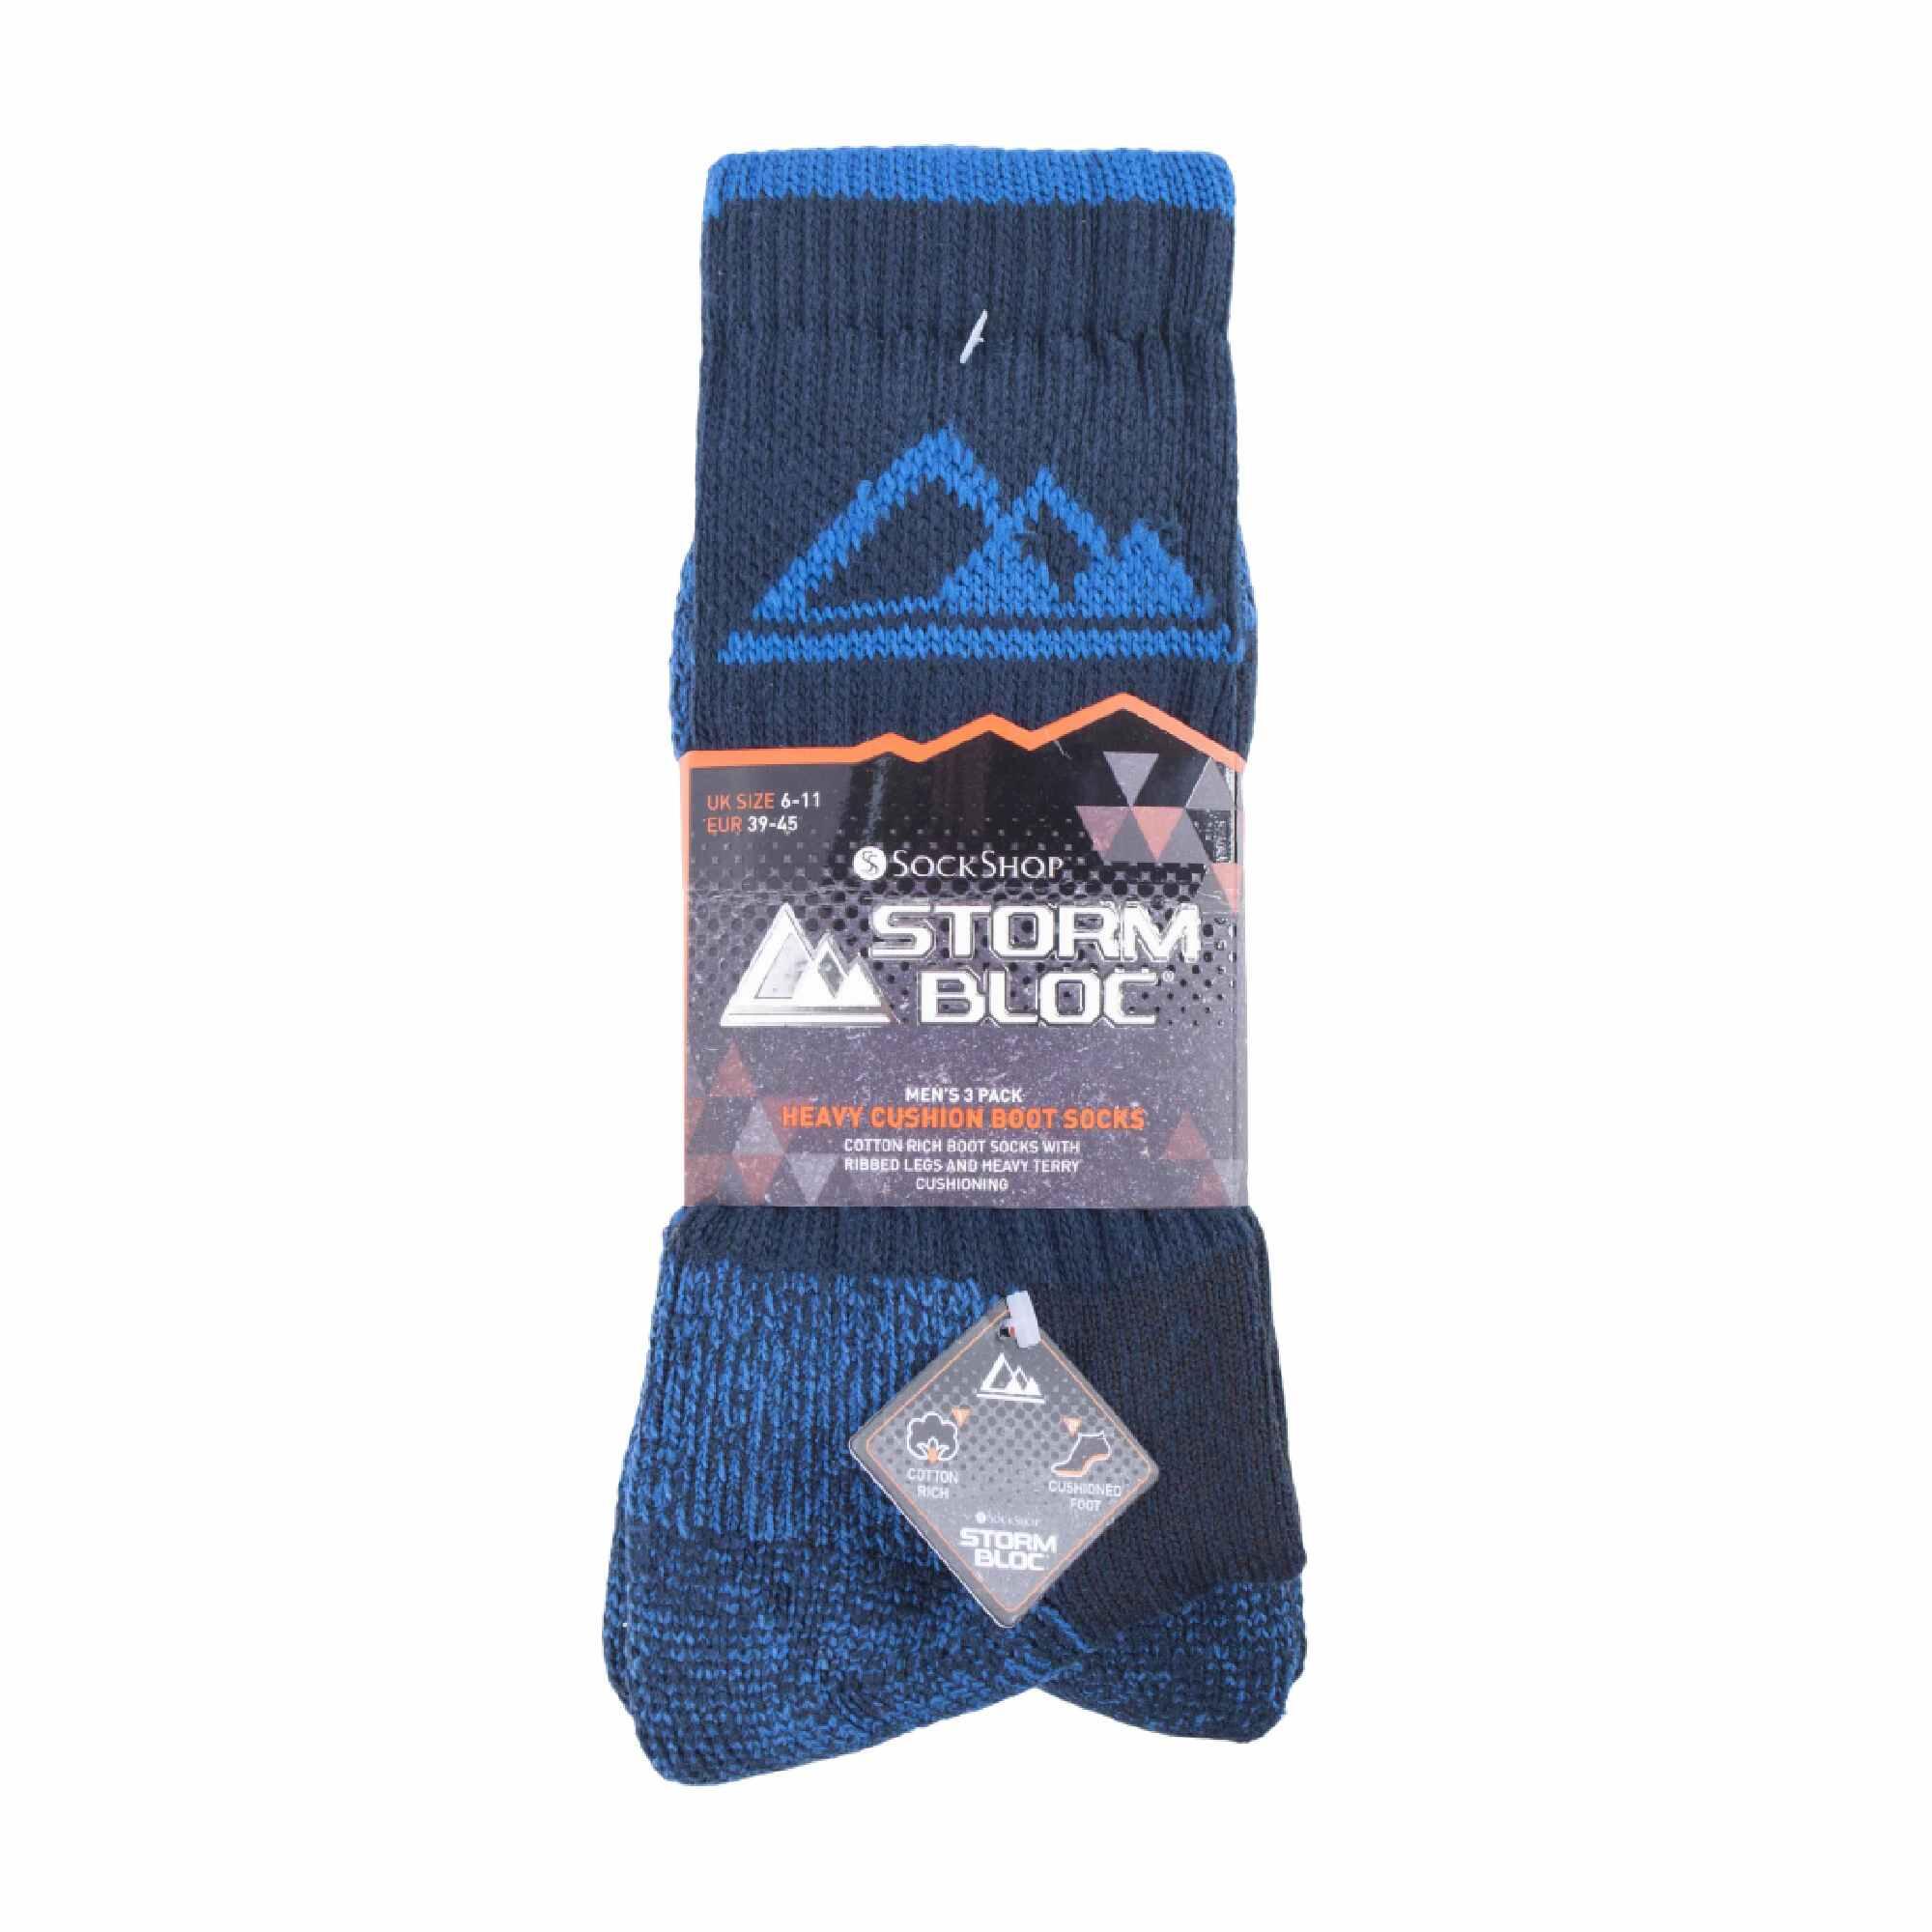 3 Pairs Mens Heavy Cushioned Breathable Outdoor Cotton Hiking Socks 2/6